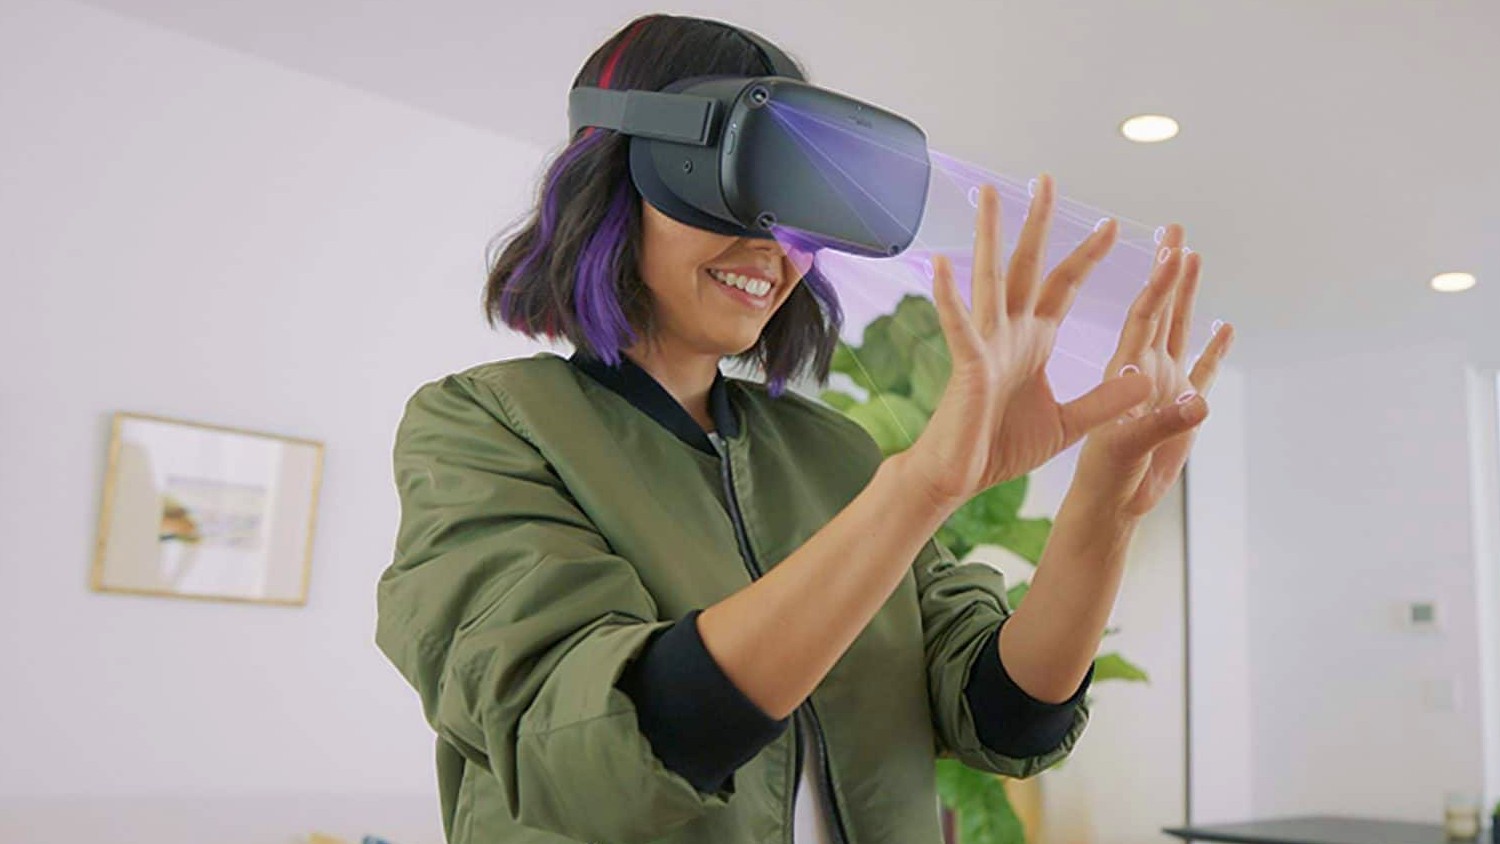 The Oculus Quest 2 can't simulate weight, but VR hand tracking helps